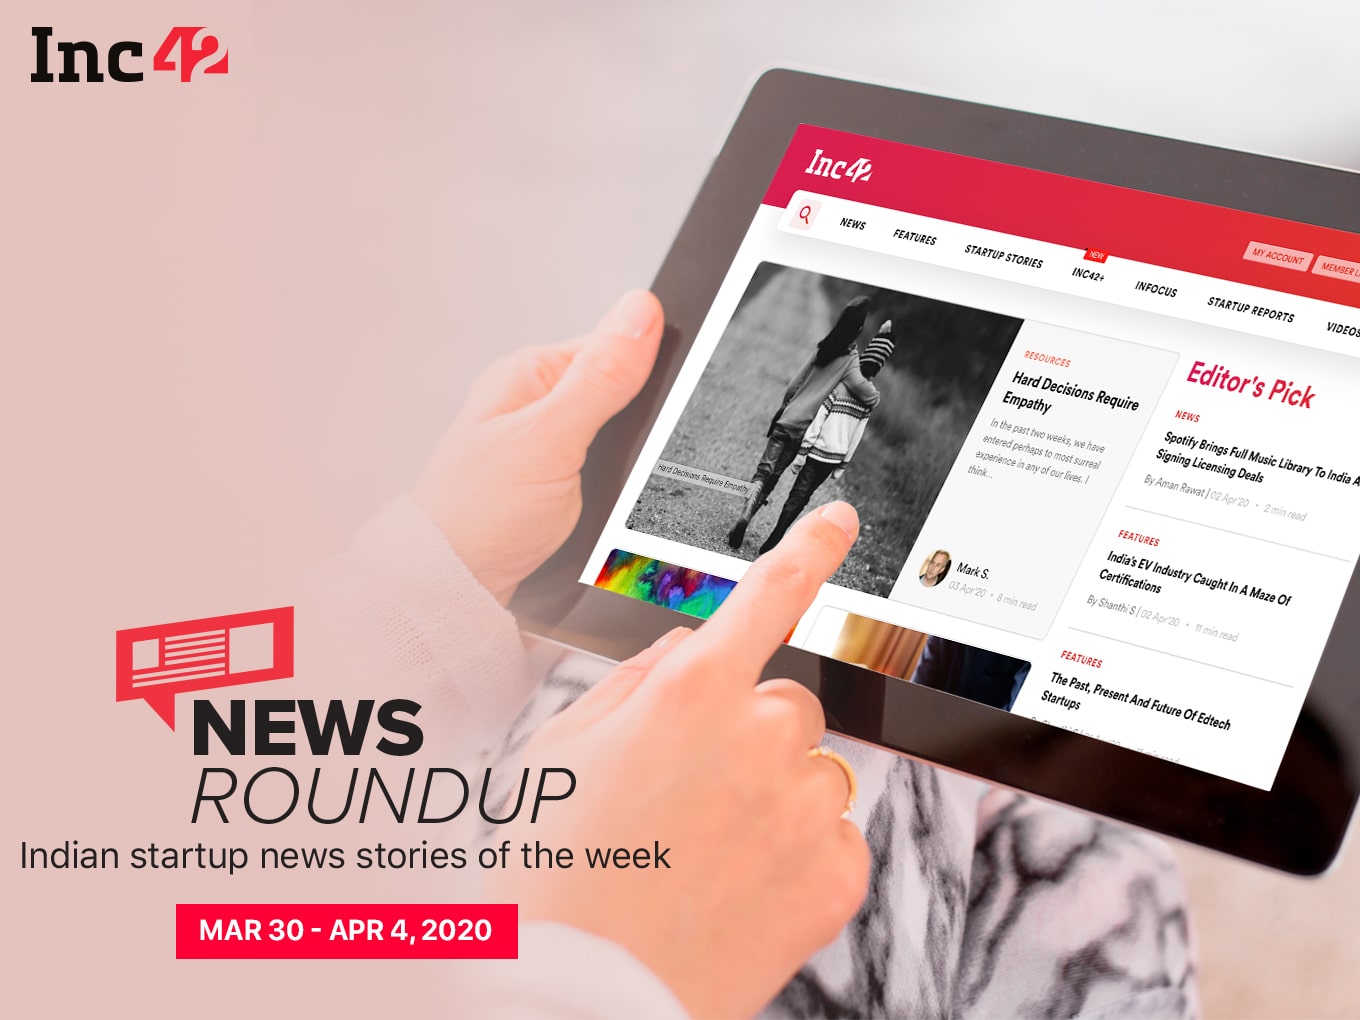 News Roundup: 11 Indian Startup News Stories You Don’t Want To Miss This Week [March 30 - April 4]